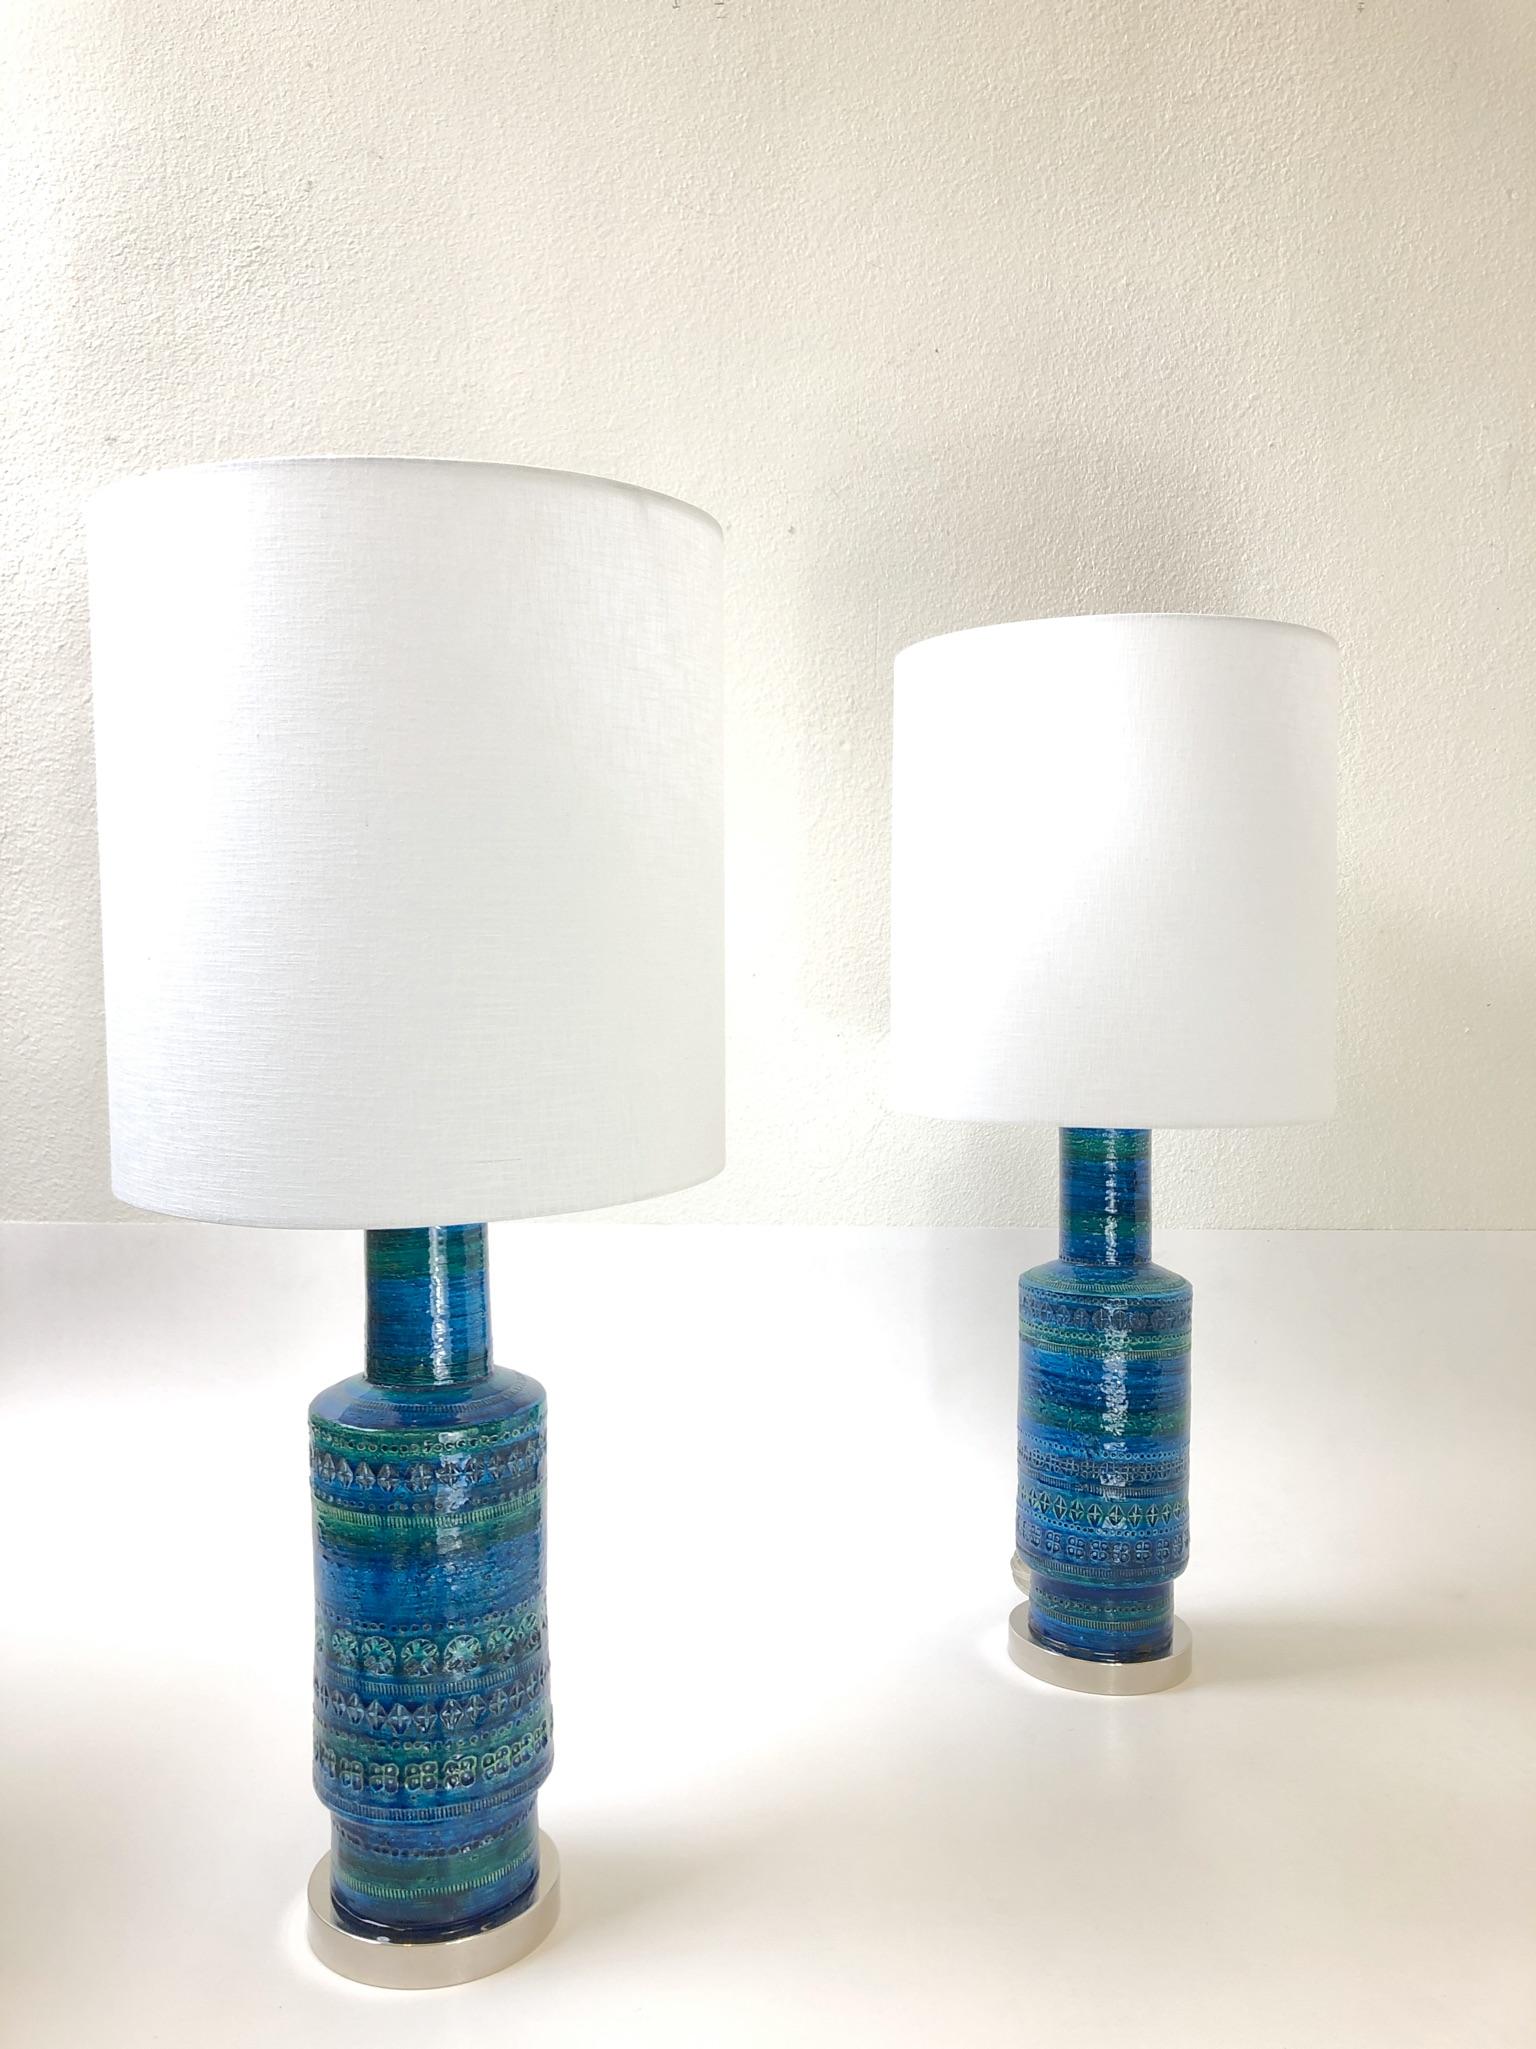 A rare pair of Italian ceramic Rimini blue table lamps design by Aldo Londi for Bitossi in the 1960s. The lamps are marked made in Italy inside the ceramic vase. The lamps have been newly rewired with new polish nickel hardware and new white linen